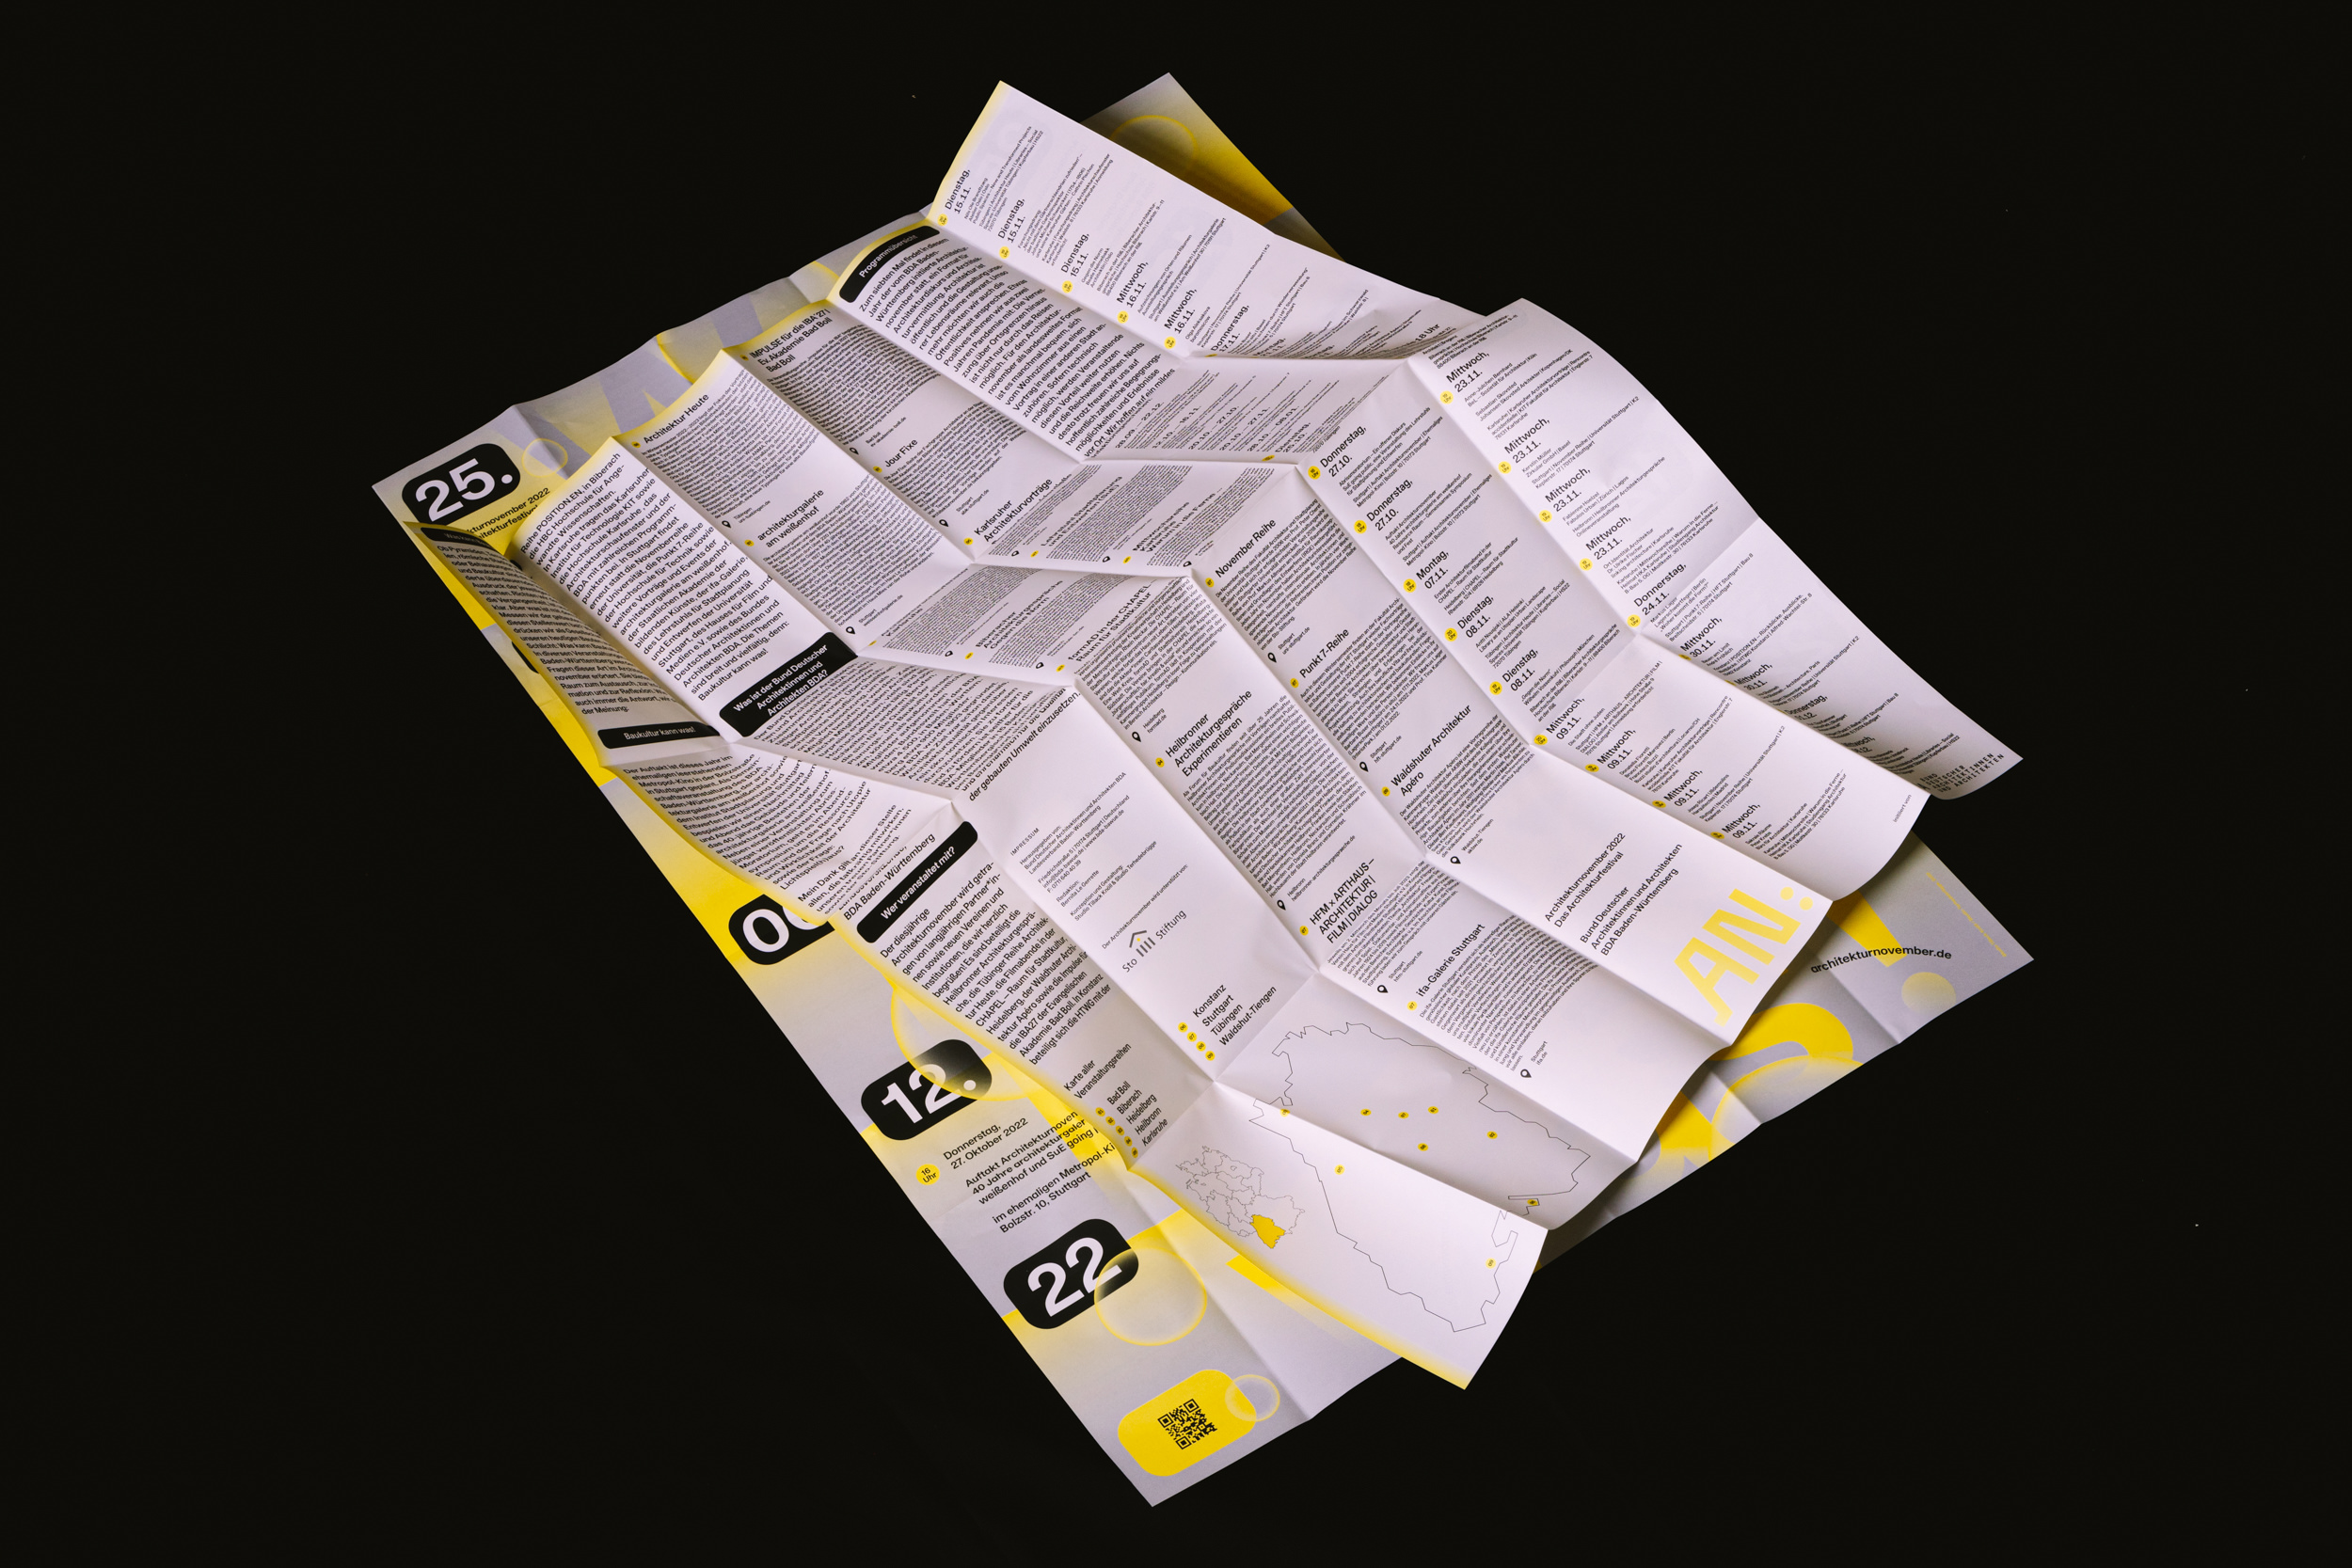 Poster and event calendar featured in one printed product — AN 2022